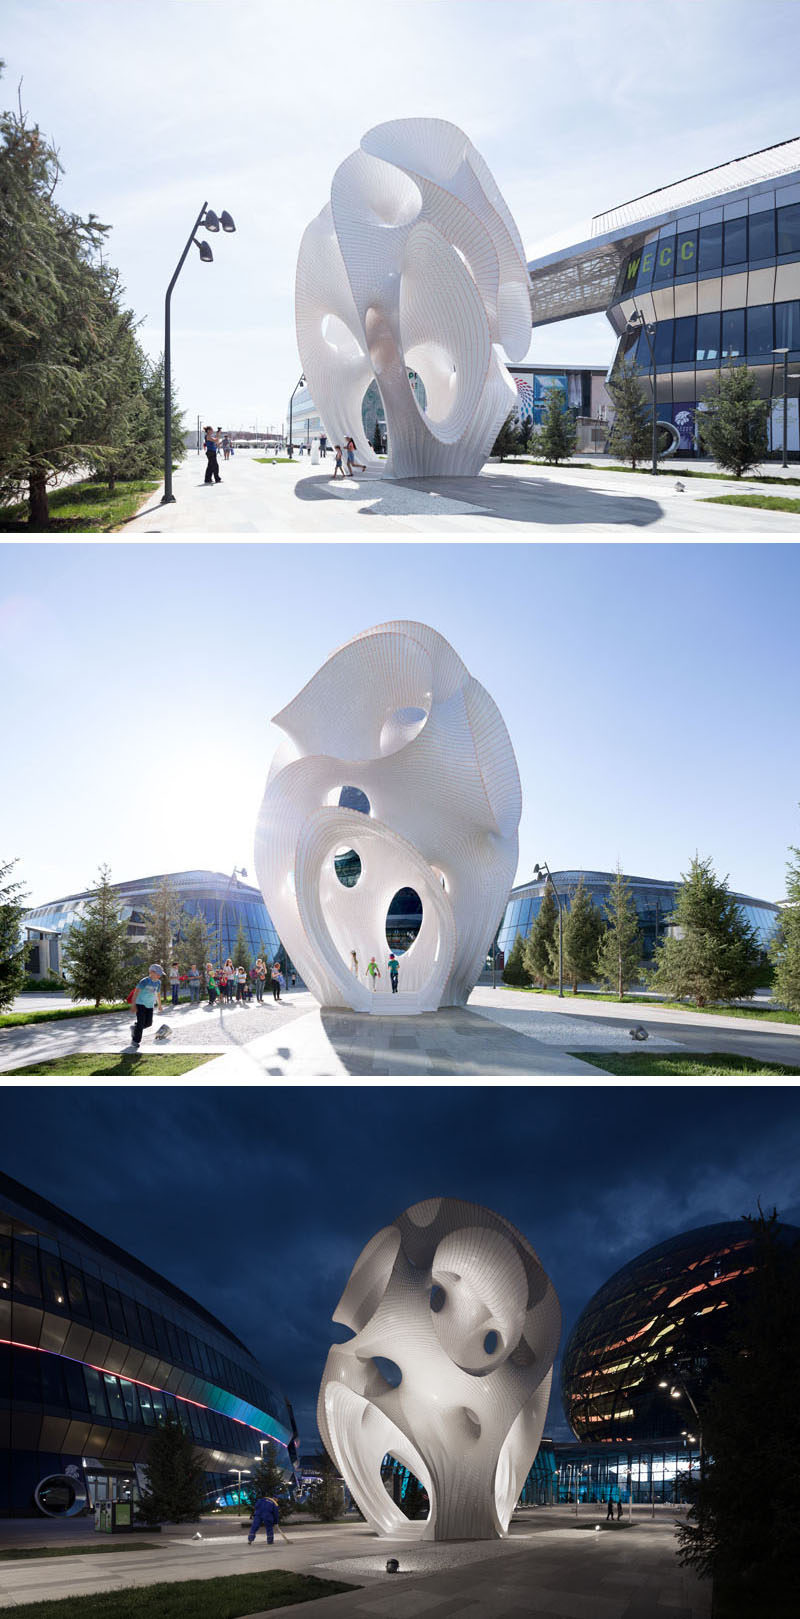 MARC FORNES / THEVERYMANY have created 'Minima | Maxima', a large public art sculpture amid the grounds of the World Expo 2017 in Astana, Kazakhstan, that's made from ?” power-coated Aluminum and stands 43 feet tall. #Art #Sculpture #PublicArt #Design